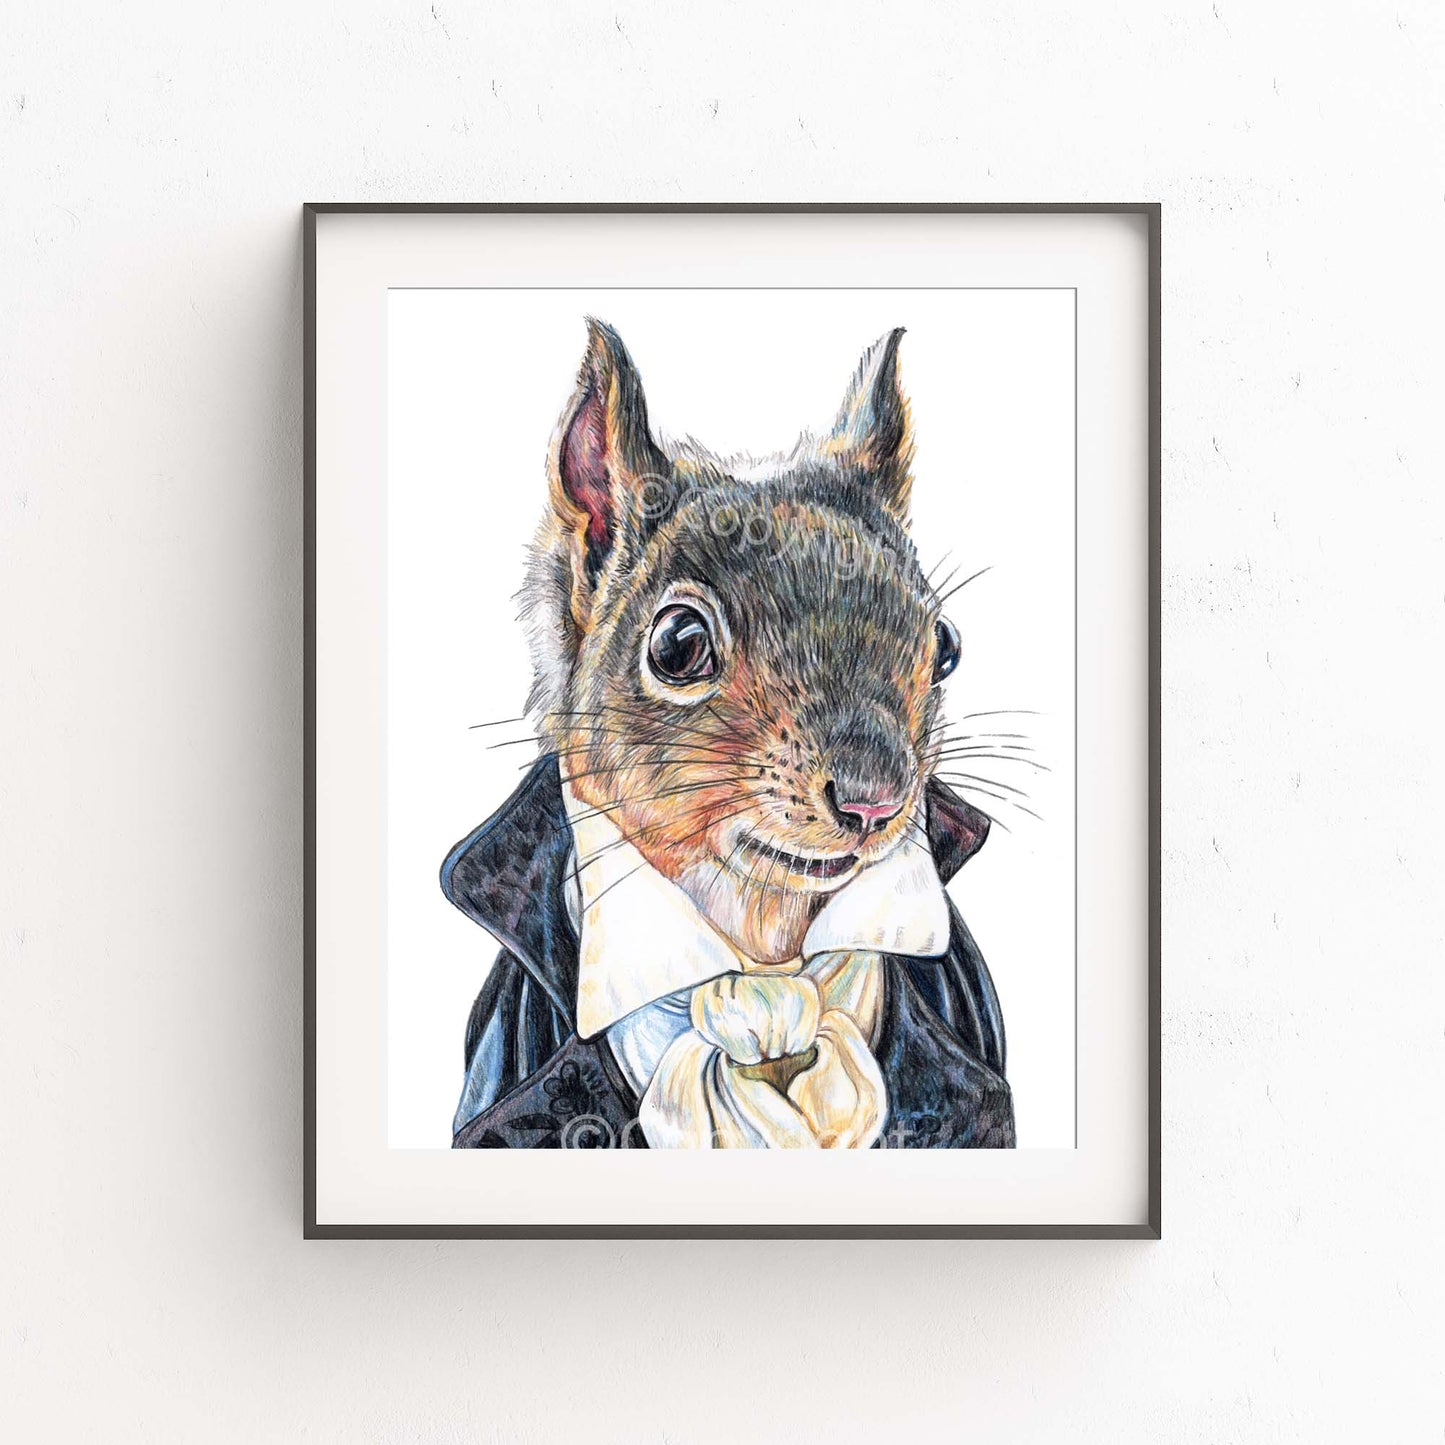 Coloured pencil drawing of a squirrel dressed like a Romantic hero from a Jane Austin book. Art by Deidre Wicks